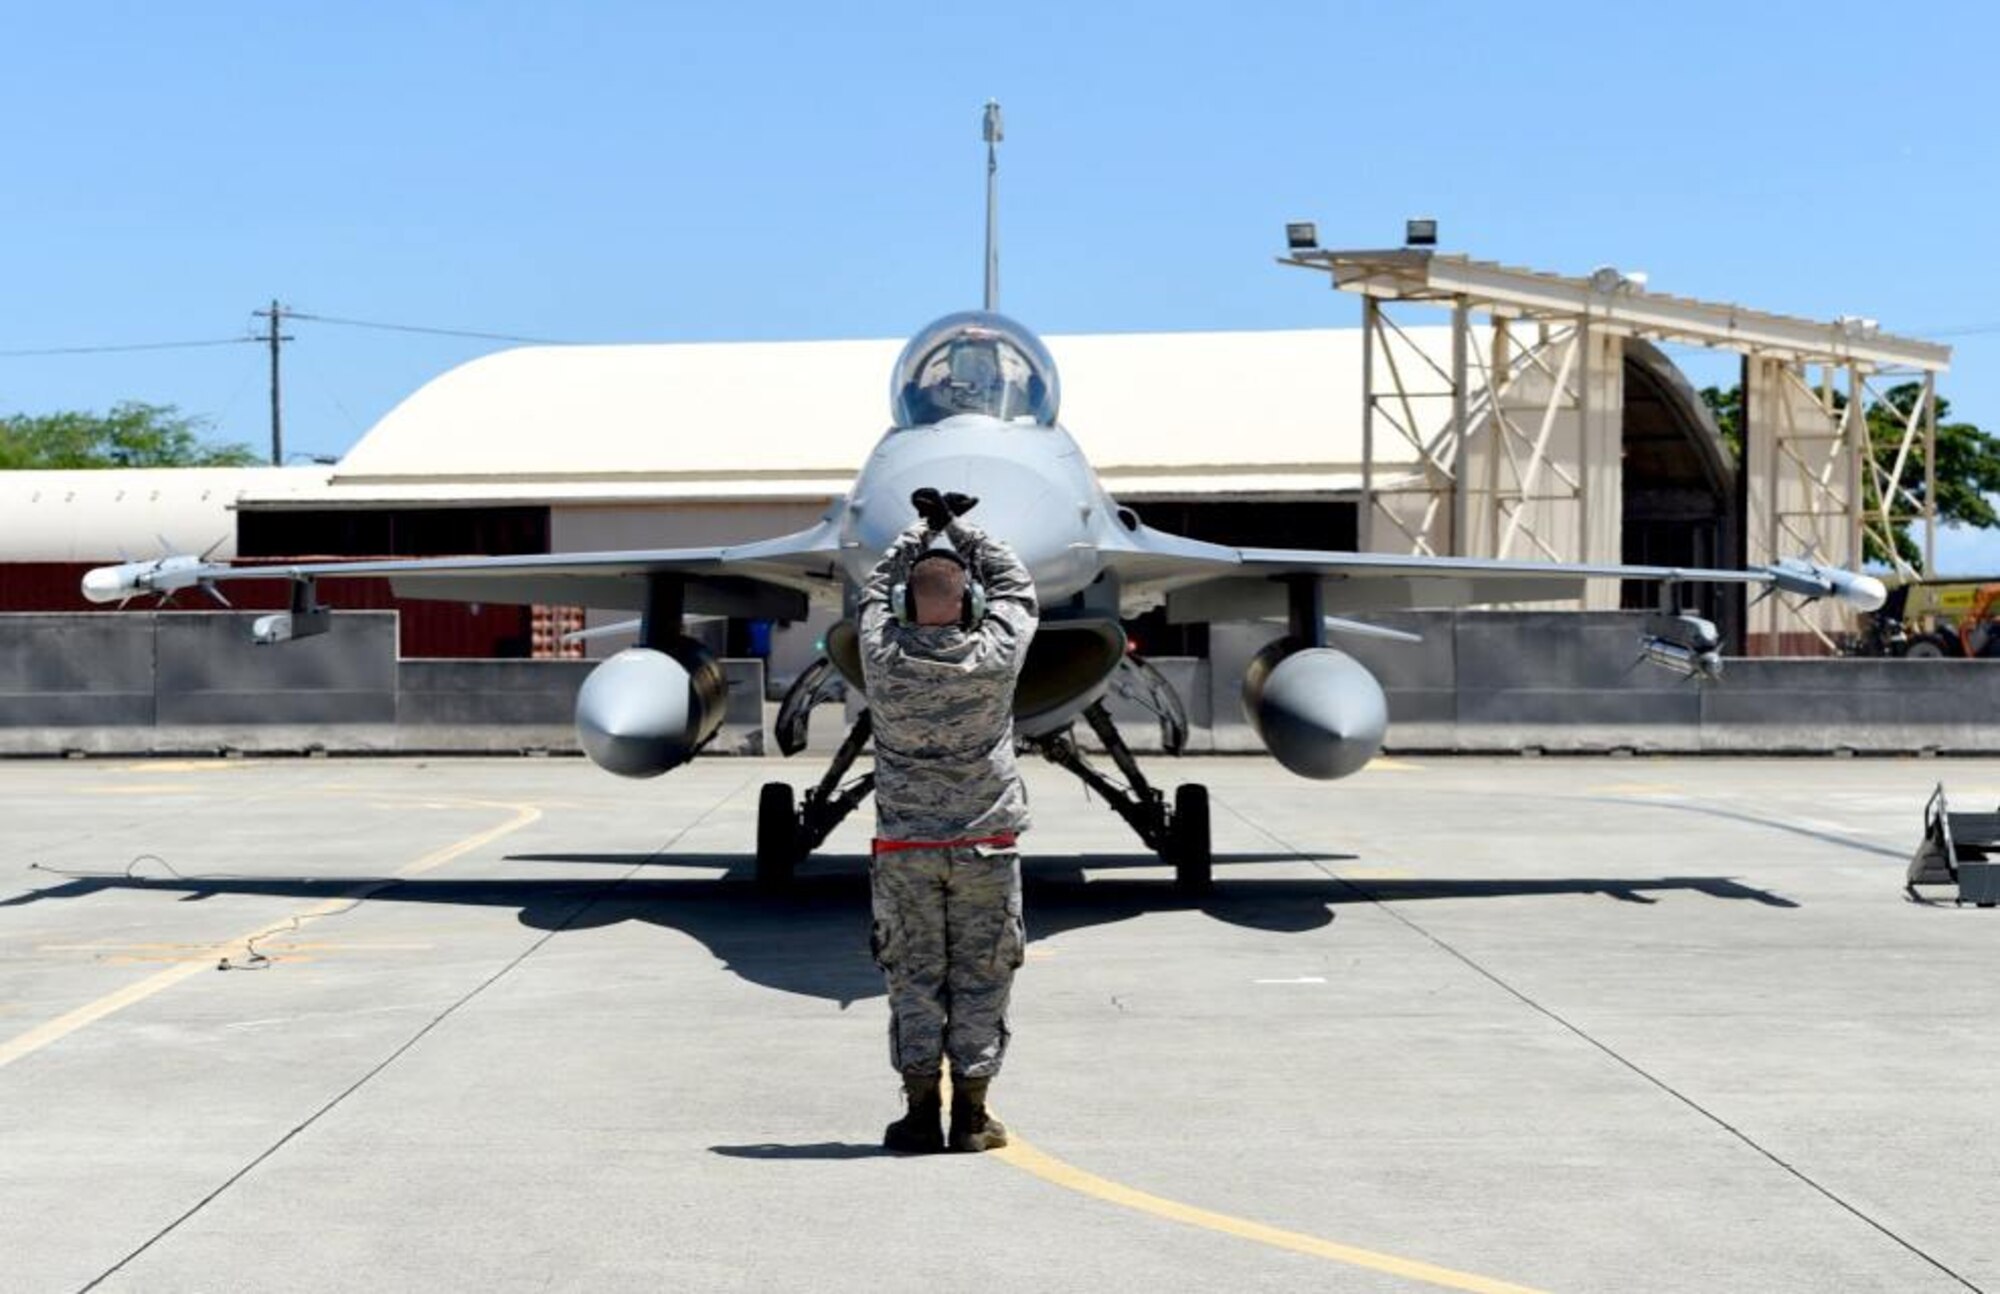 Tech. Sgt. Adam Flood, a crew chief with the 149th Fighter Wing, Texas Air National Guard, headquartered at Joint Base San Antonio-Lackland, Texas, marshals an F-16 Fighting Falcon at Joint Base Pearl Harbor Hickam, Hawaii, Aug. 18, 2016. Flood participated in Sentry Aloha 2016, a large-scale fighter exercise hosted by the Hawaii Air National Guard. (U.S. Air National Guard photo by Tech. Sgt. Rebekkah Jandron)